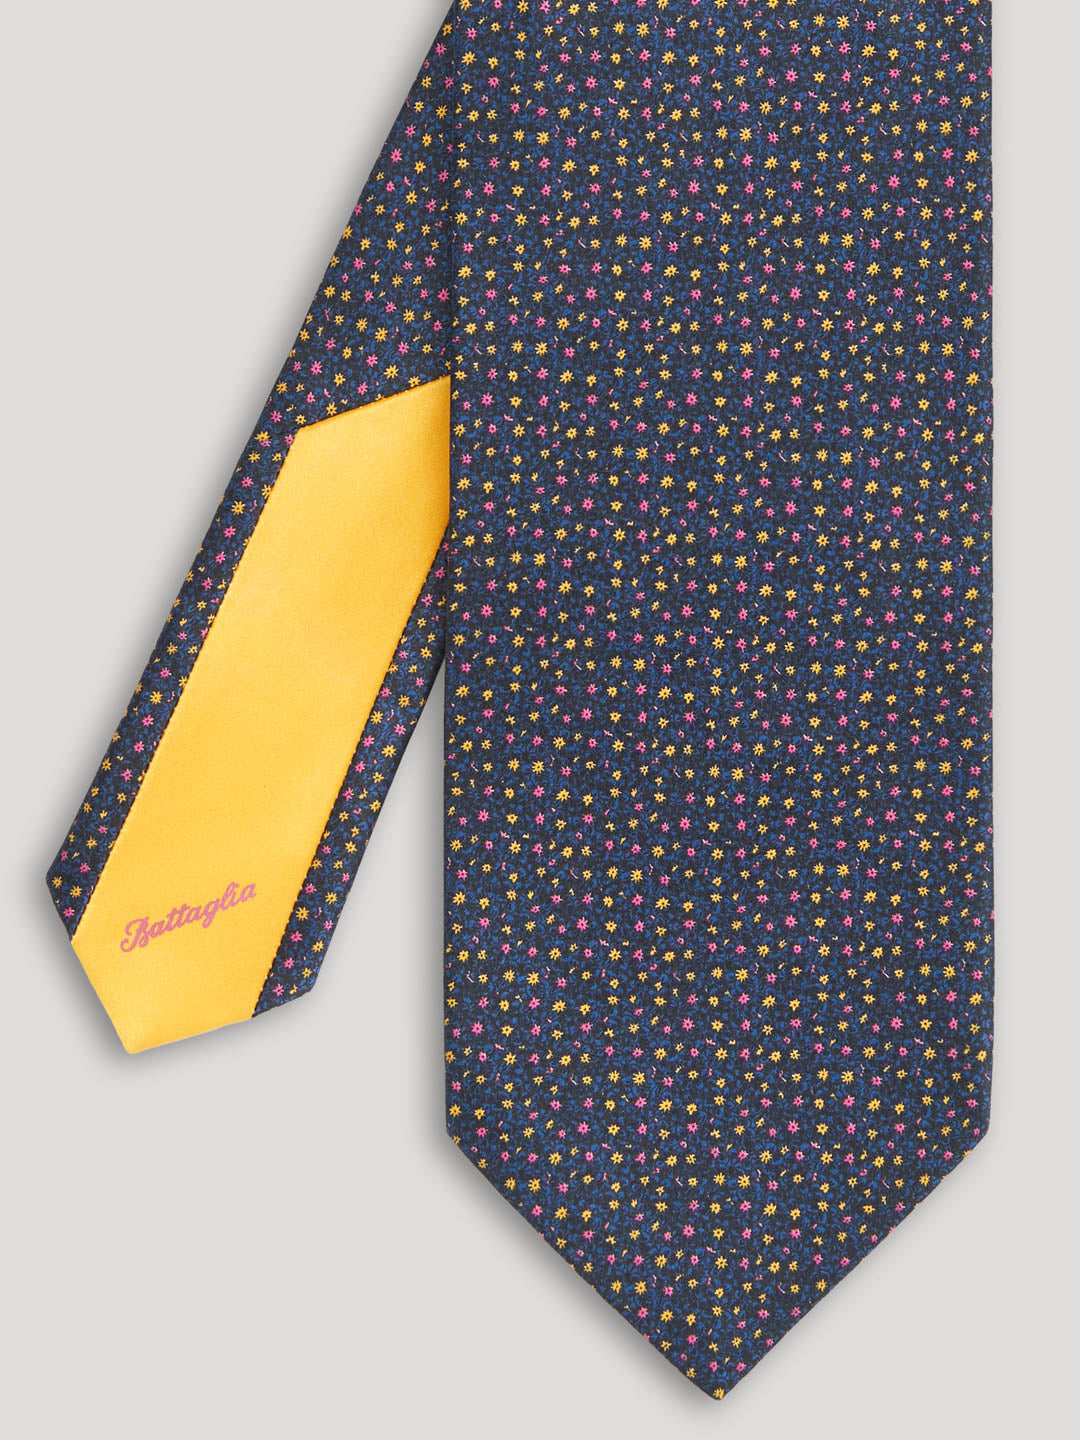 Navy blue floral tie with pink and yellow floral details.